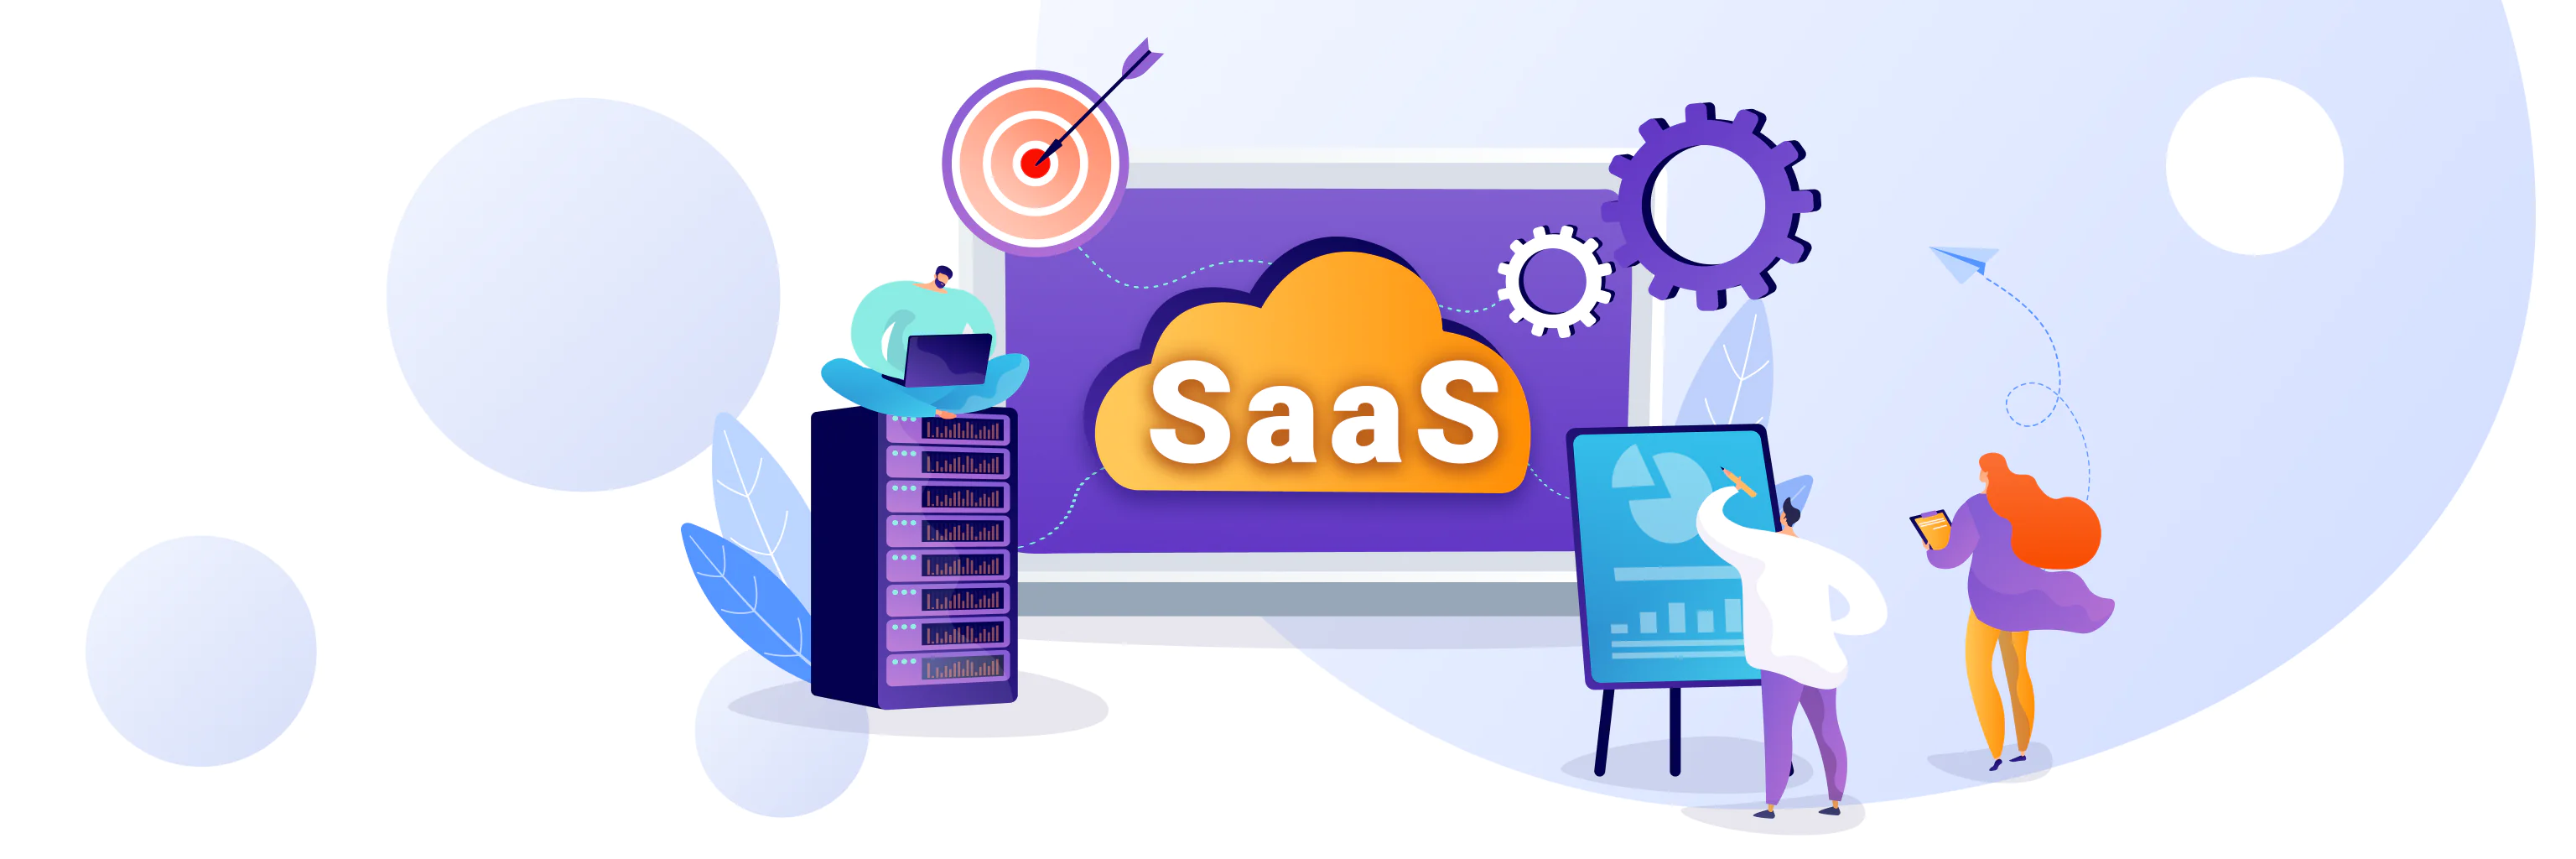 SaaS Development Services: How to Build a SaaS Product